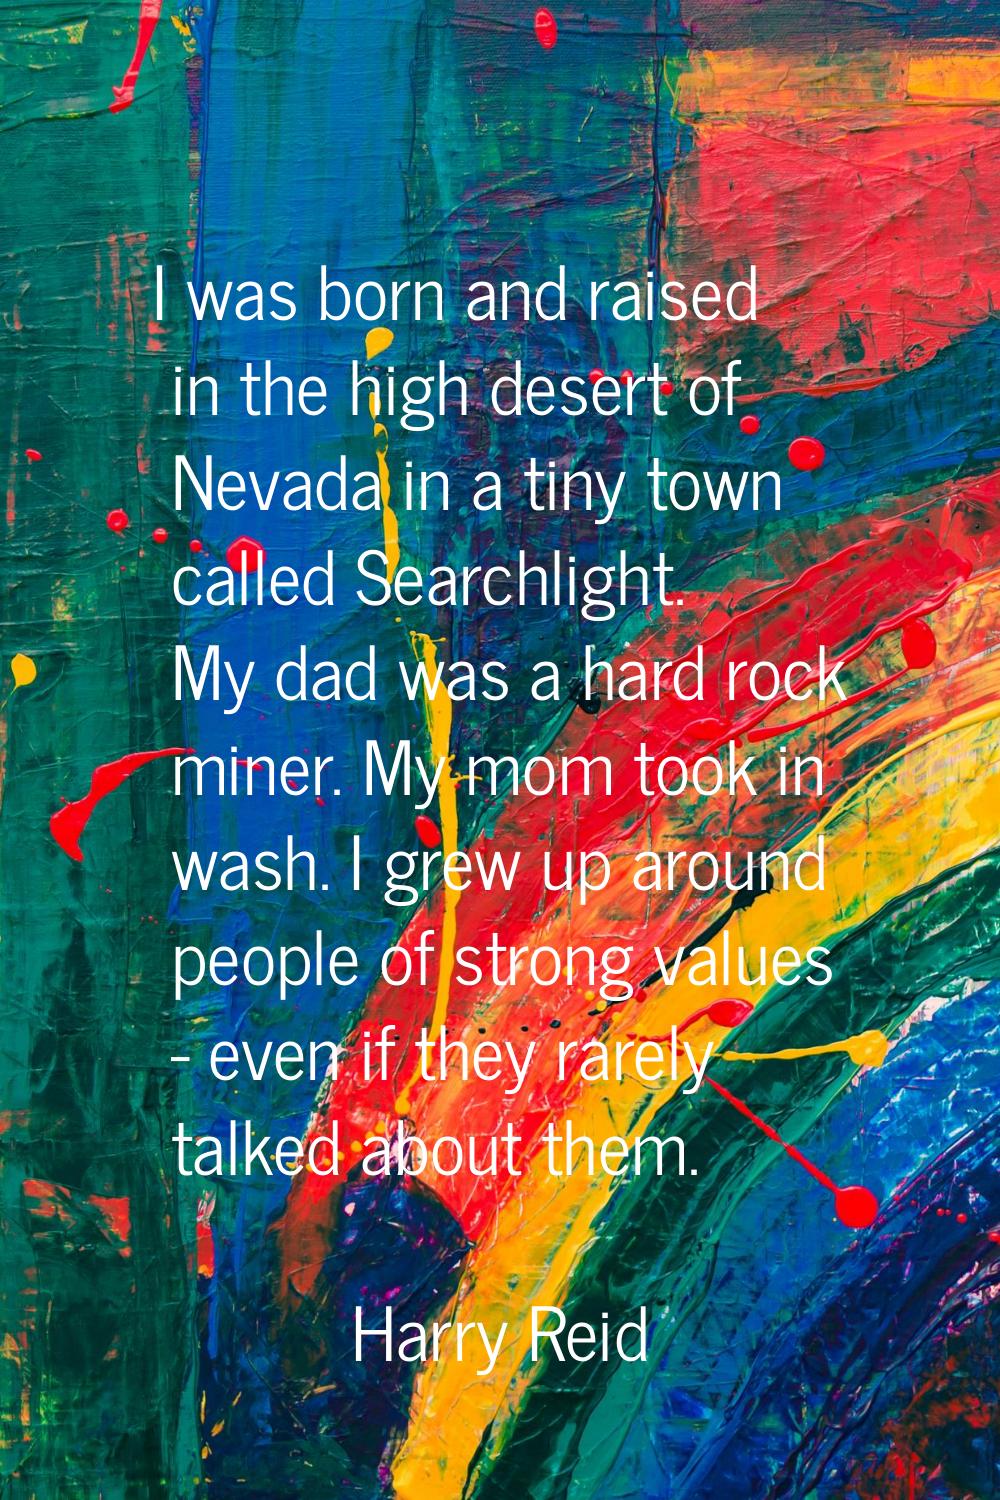 I was born and raised in the high desert of Nevada in a tiny town called Searchlight. My dad was a 